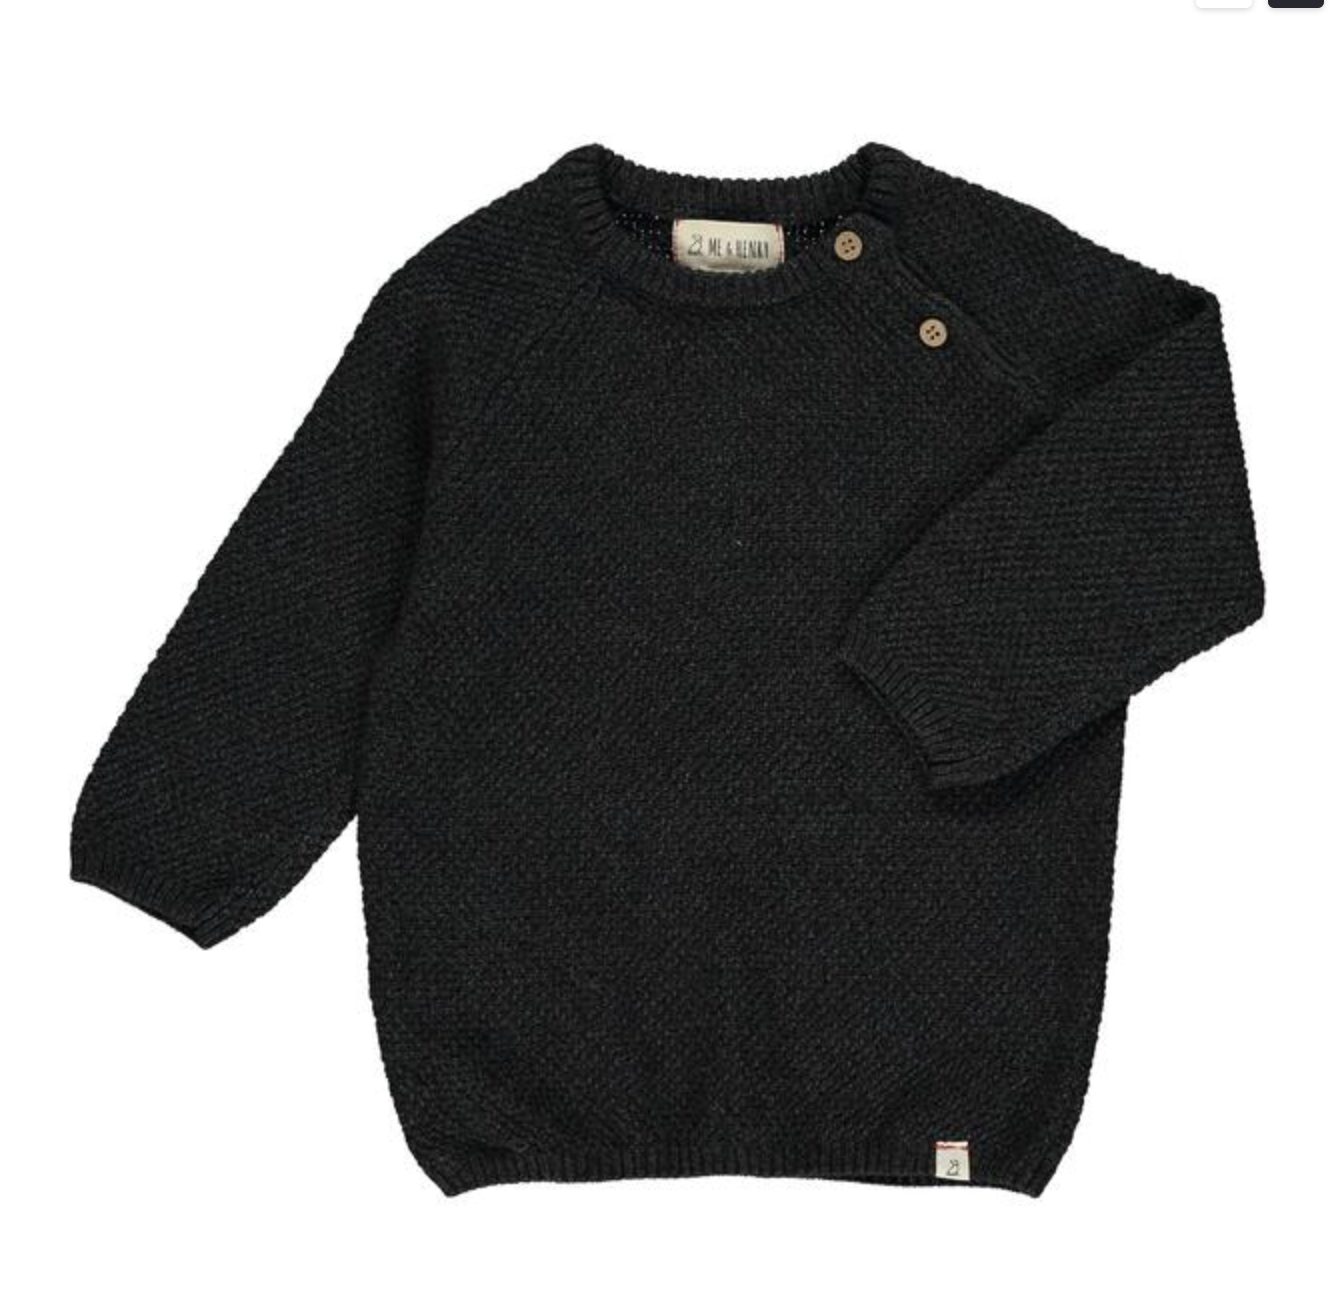 Me & Henry Roan Sweater - Charcoal